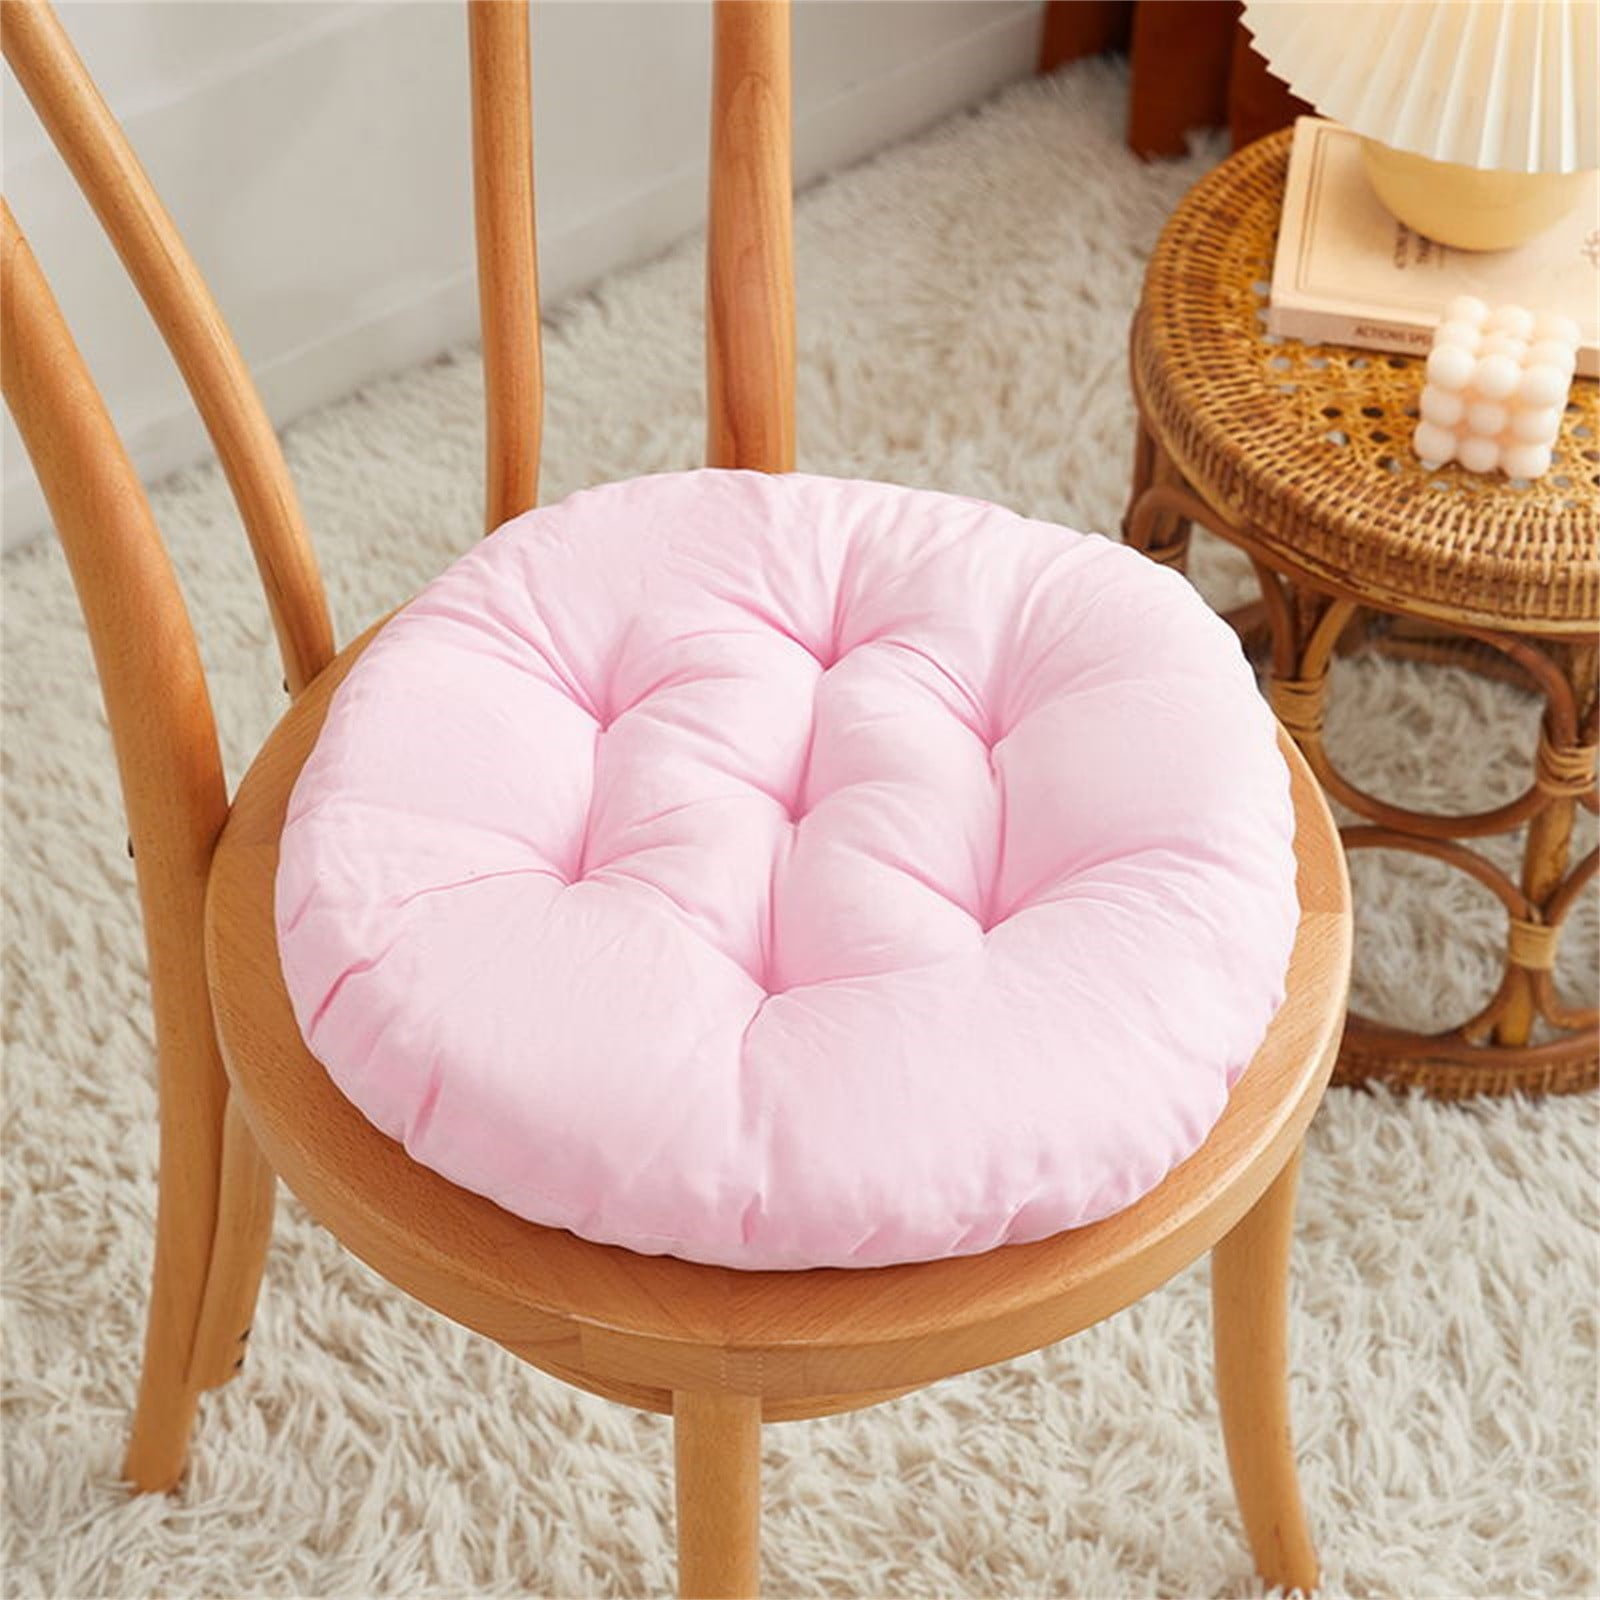  HATALK Office Chair Cushion - Extra Large Conjoined Seat Cushion  for Long Sitting, Butt and Back Support. Soft Crystal Velvet Chair Pad for Desk  Chair (Color : Pink, Size : 45 *